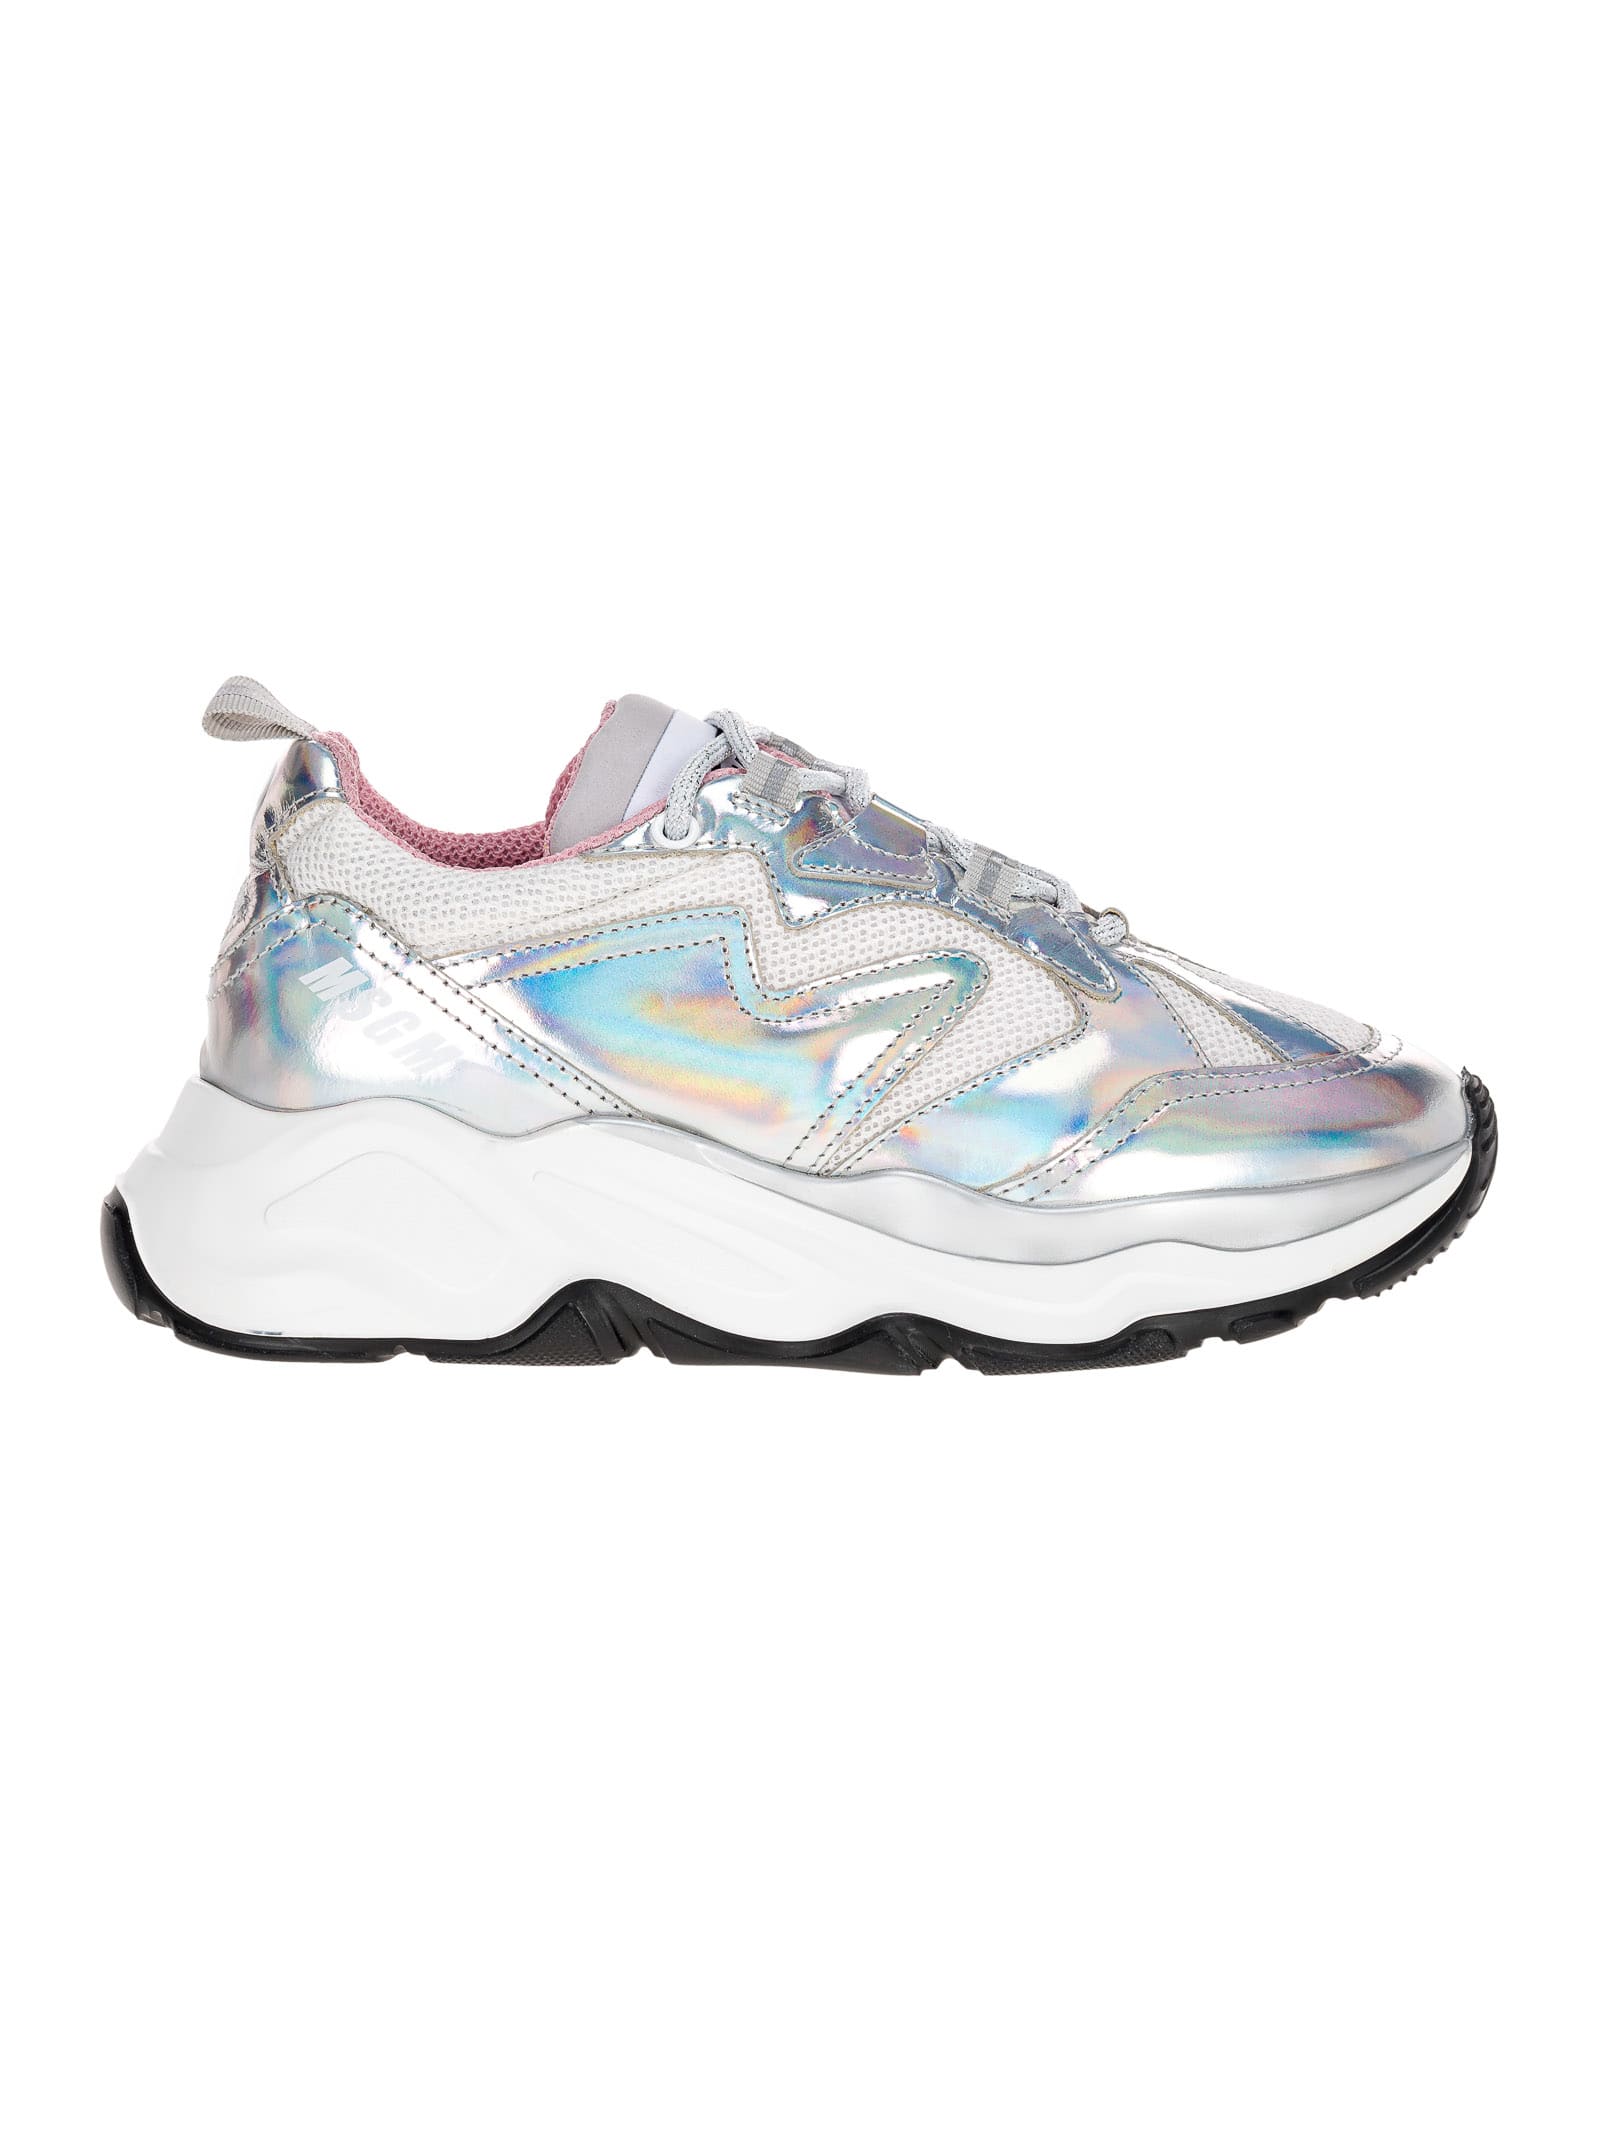 MSGM MSGM HOLOGRAPHIC ATTACK LOW-TOP SNEAKERS,11138005